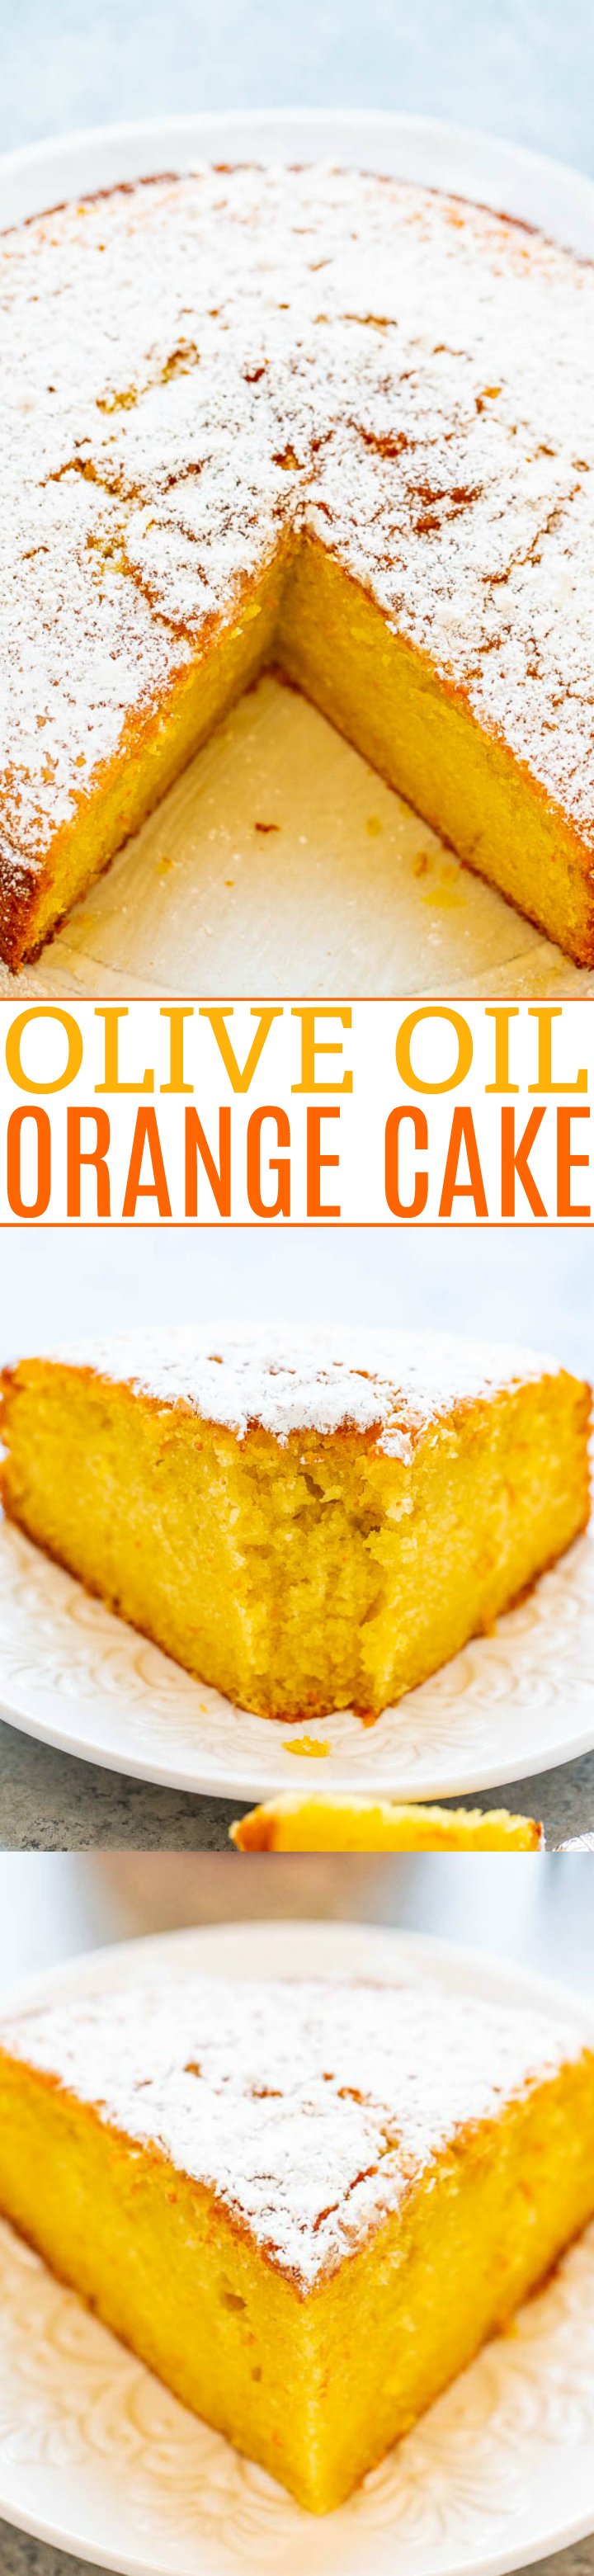 Olive Oil Orange Cake - A super soft and moist cake that's made with olive oil!! Orange zest, orange juice, and Gran Marnier add tons of AMAZING orange flavor to this easy, no-mixer cake that's unique, refined, and INCREDIBLE!!